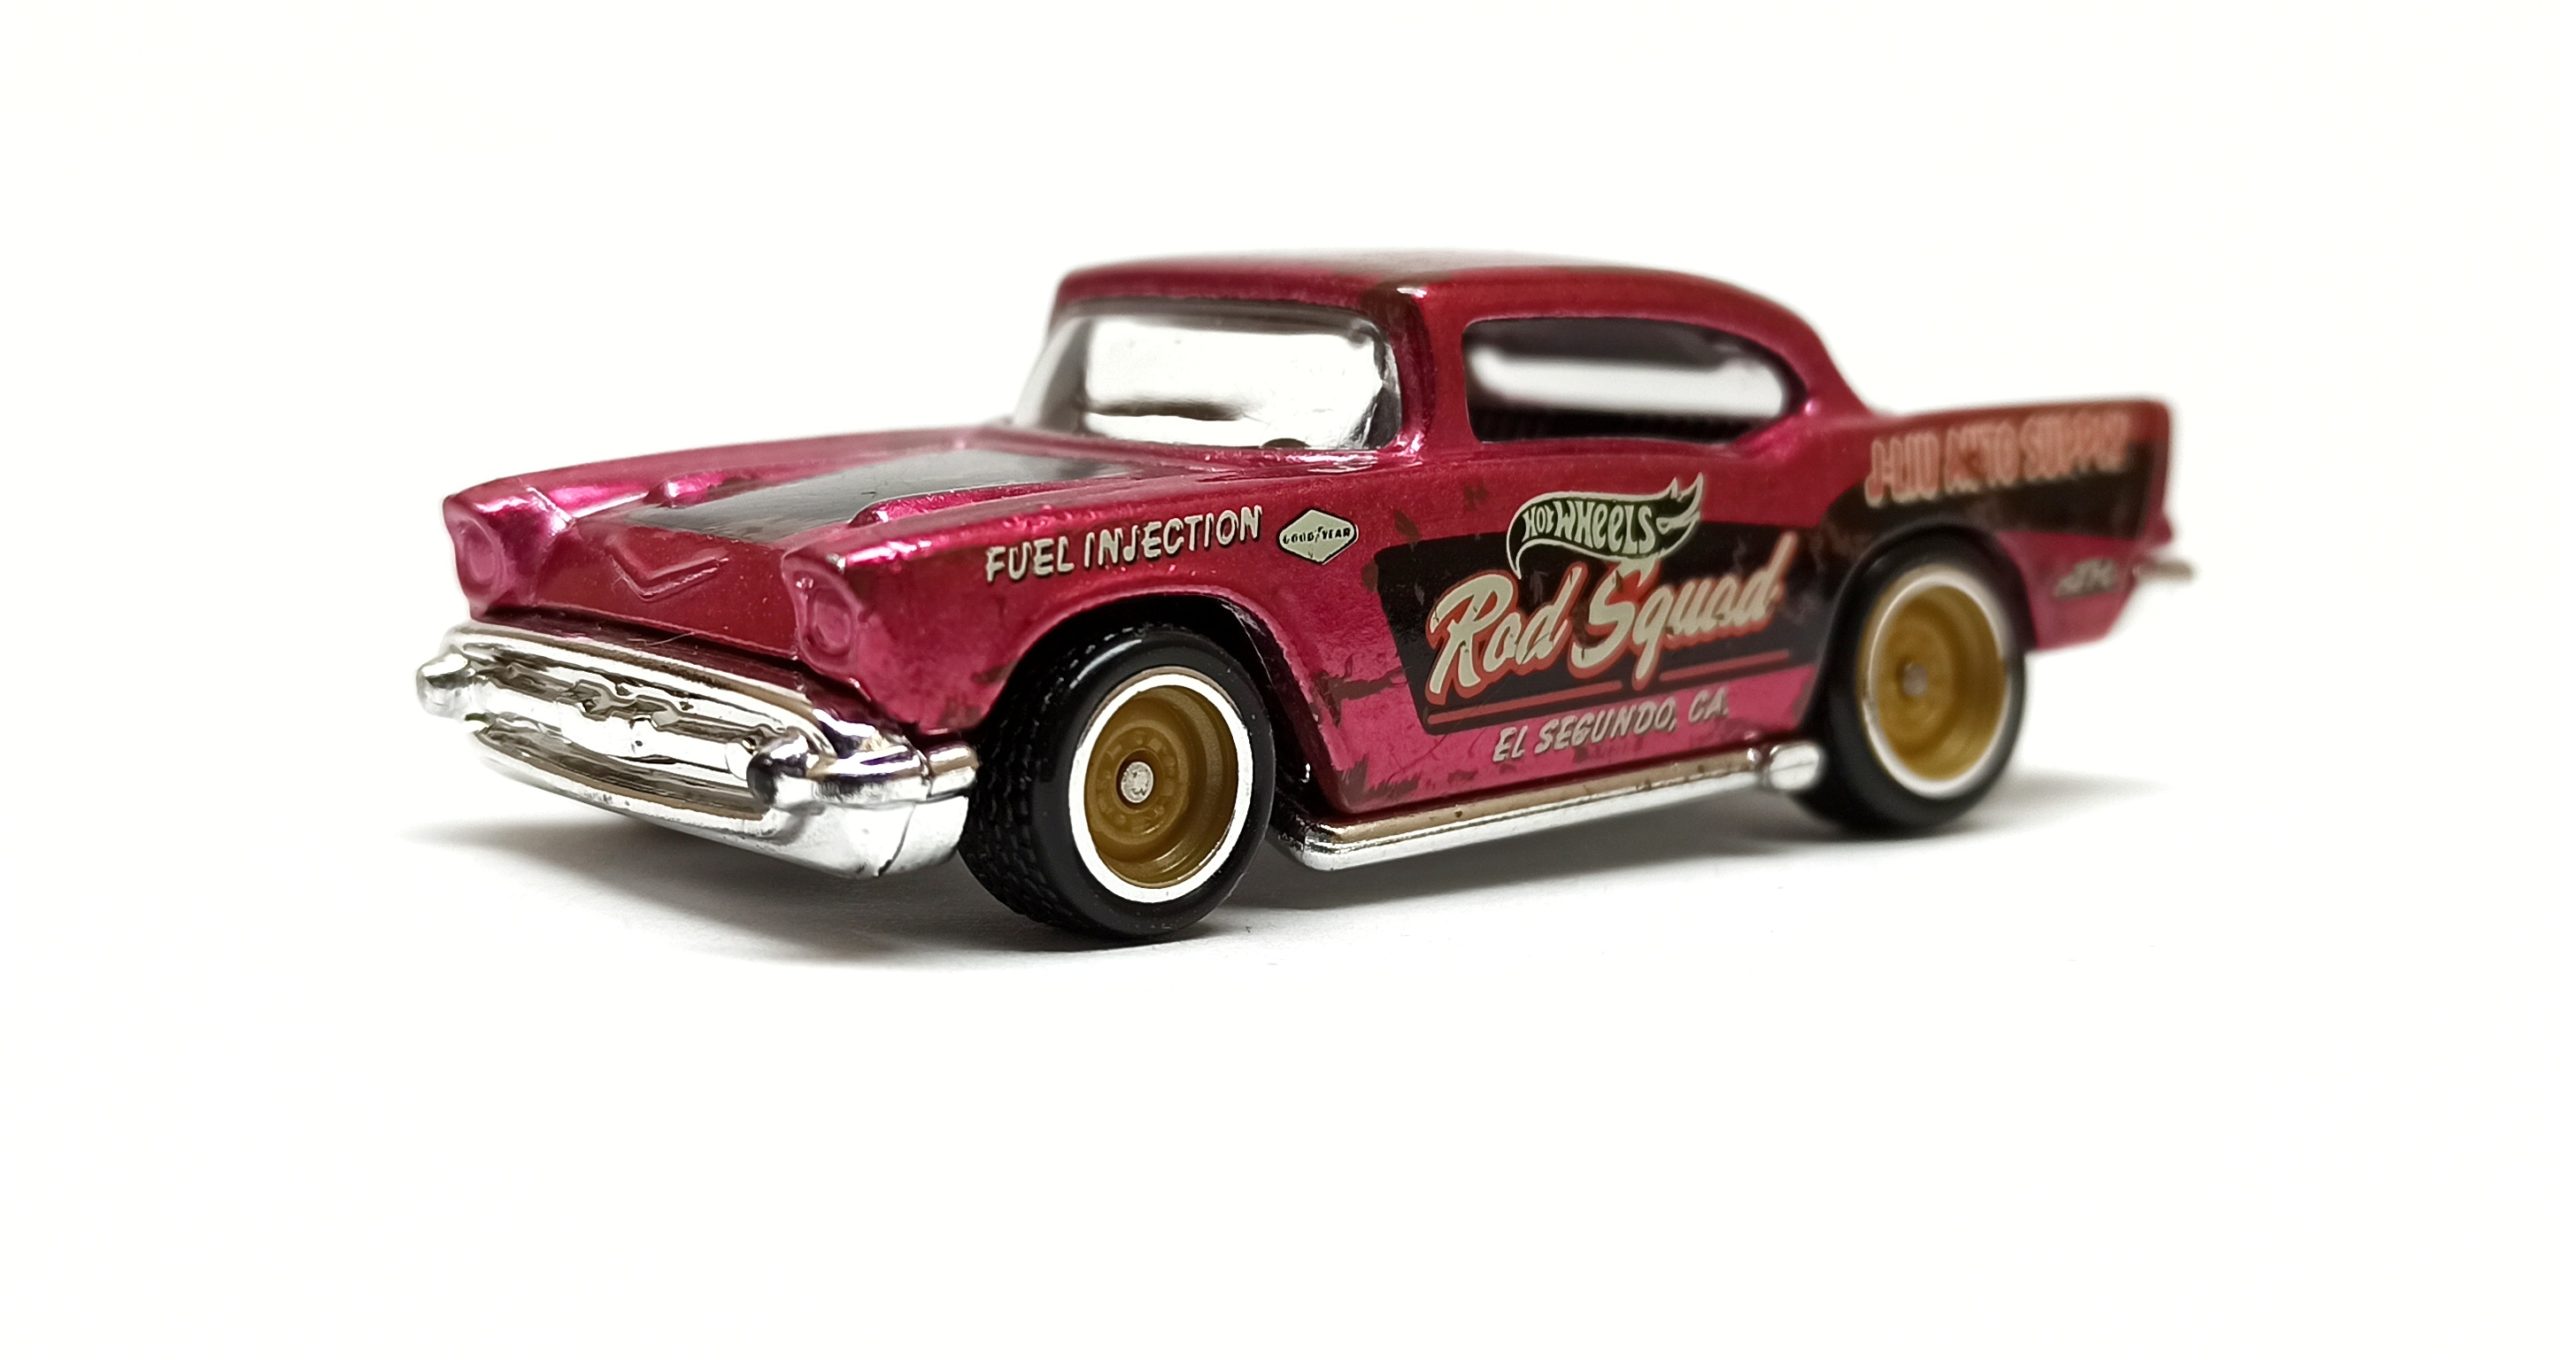 Hot Wheels '57 Chevy (GHG27) 2020 (180/250) Rod Squad (10/10) spectraflame pink Super Treasure Hunt (STH)